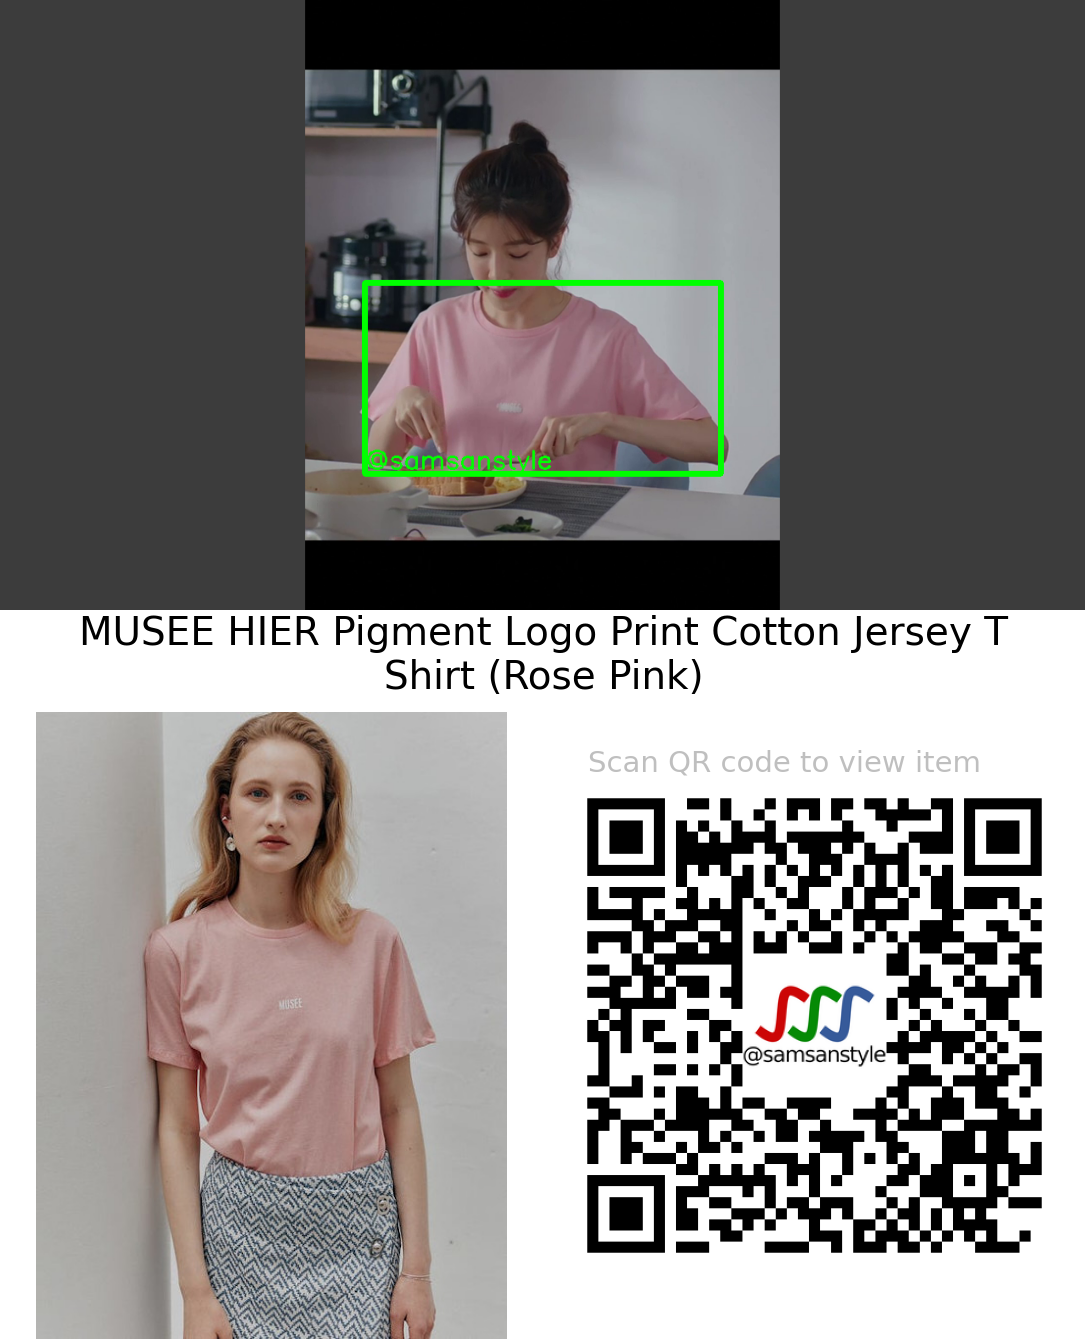 Jung Insun | Let Me Be Your Knight E05 | MUSEE HIER Pigment Logo Print Cotton Jersey T Shirt (Rose Pink)